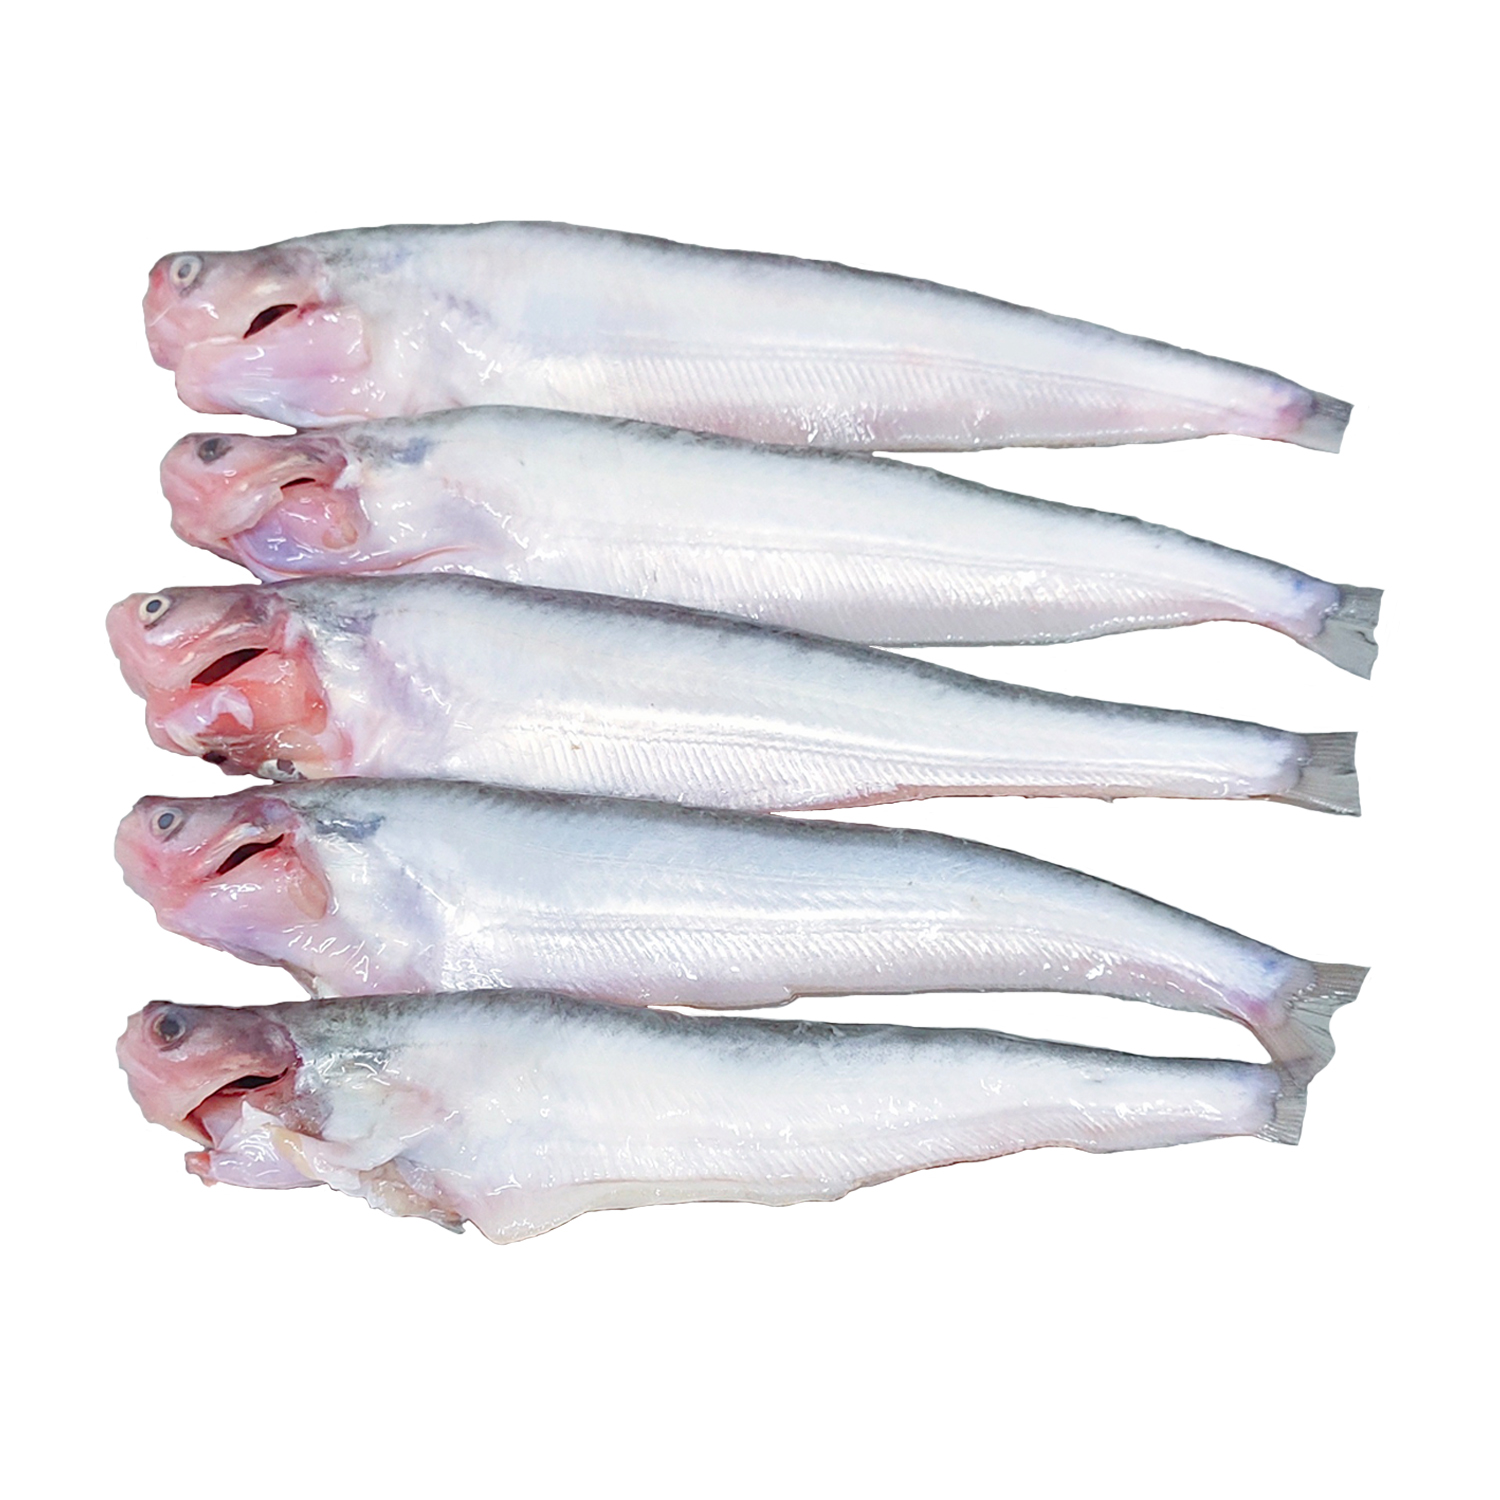 Pabda Fish Whole cleaned 500Gms (4-6pieces)